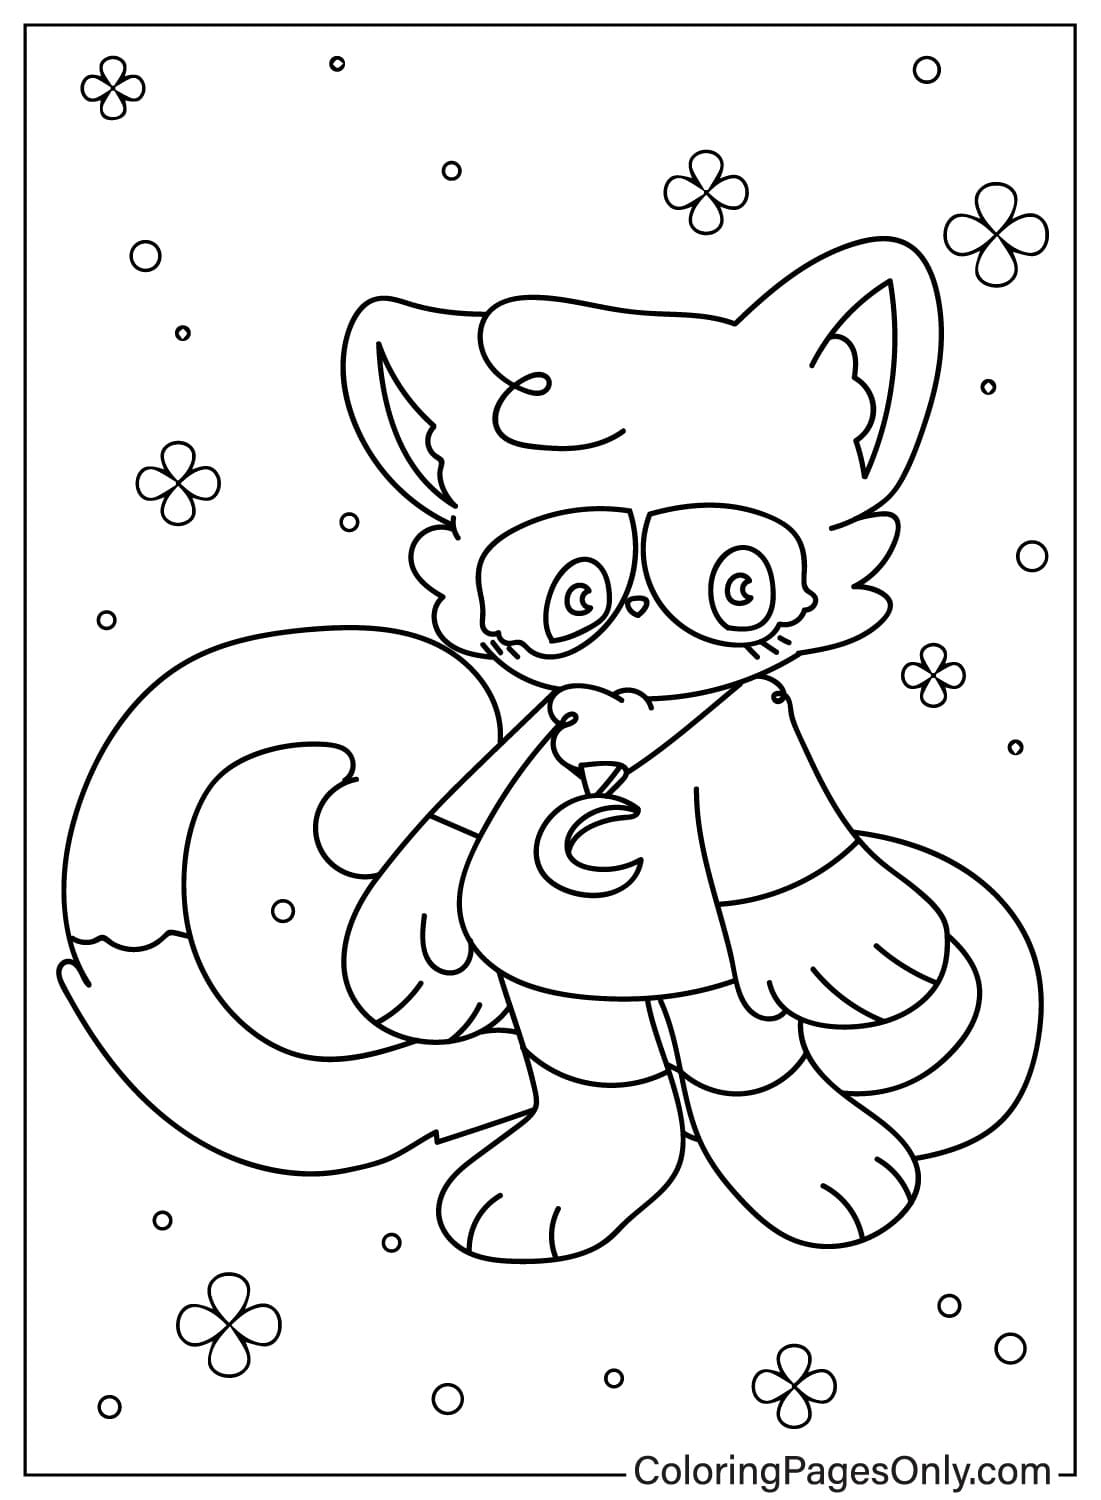 CatNap Coloring Page Images from CatNap